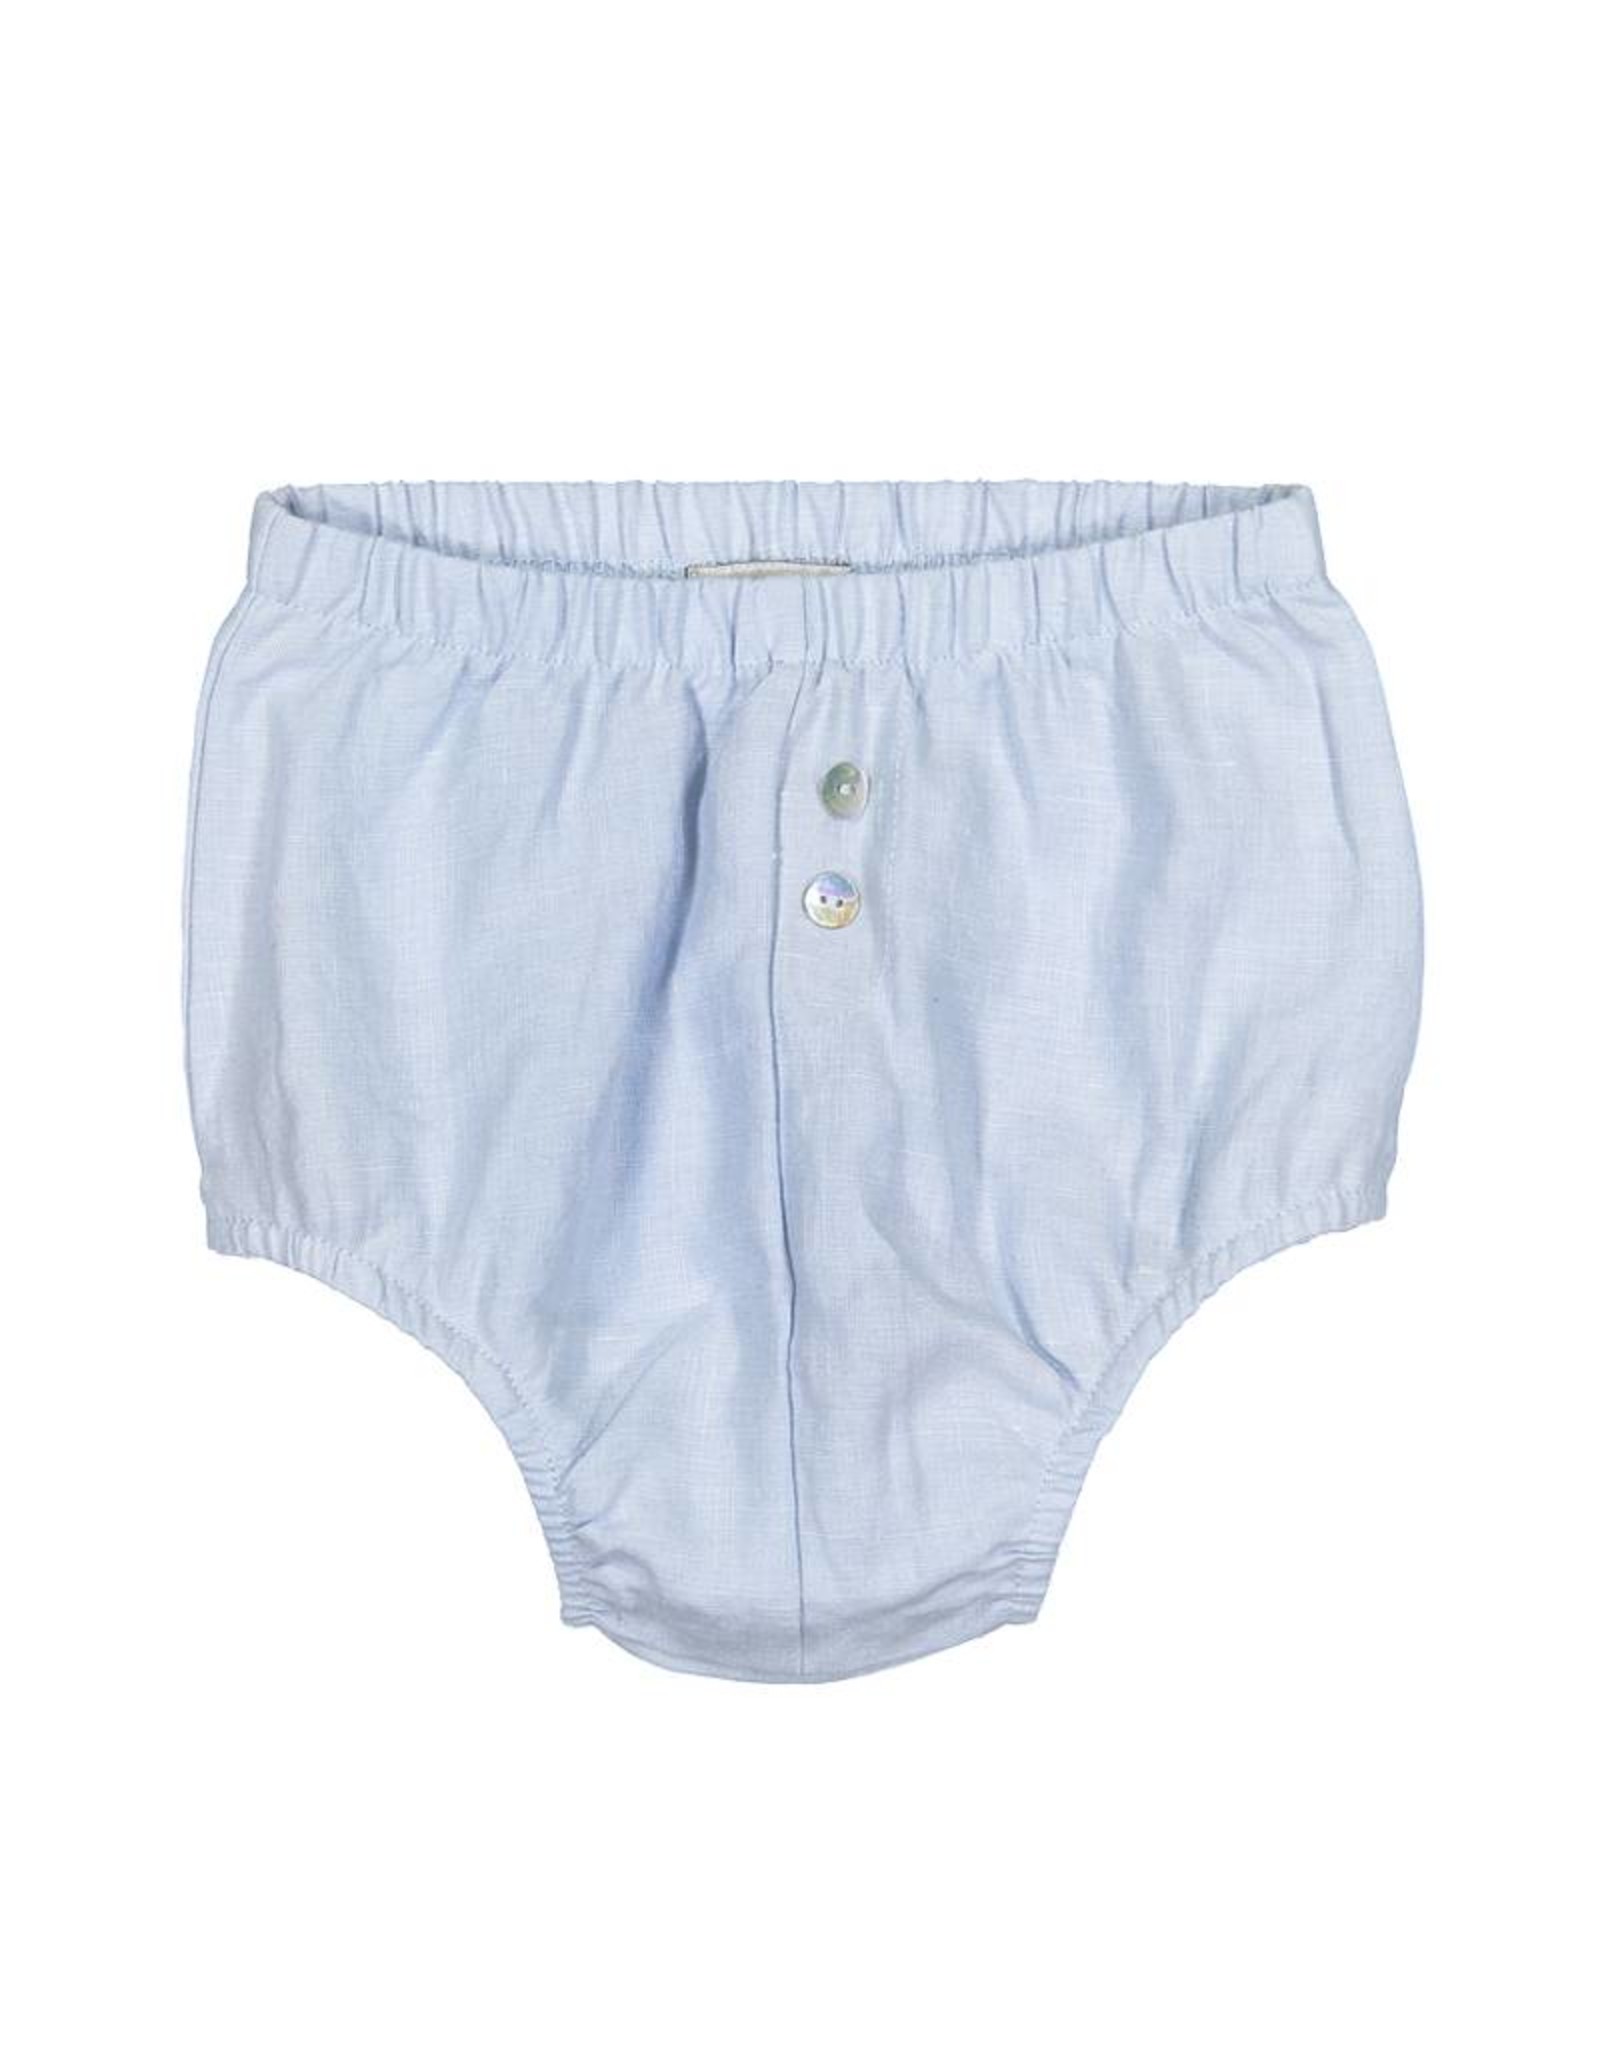 Analogie Analogie SS19 Linen Bloomers